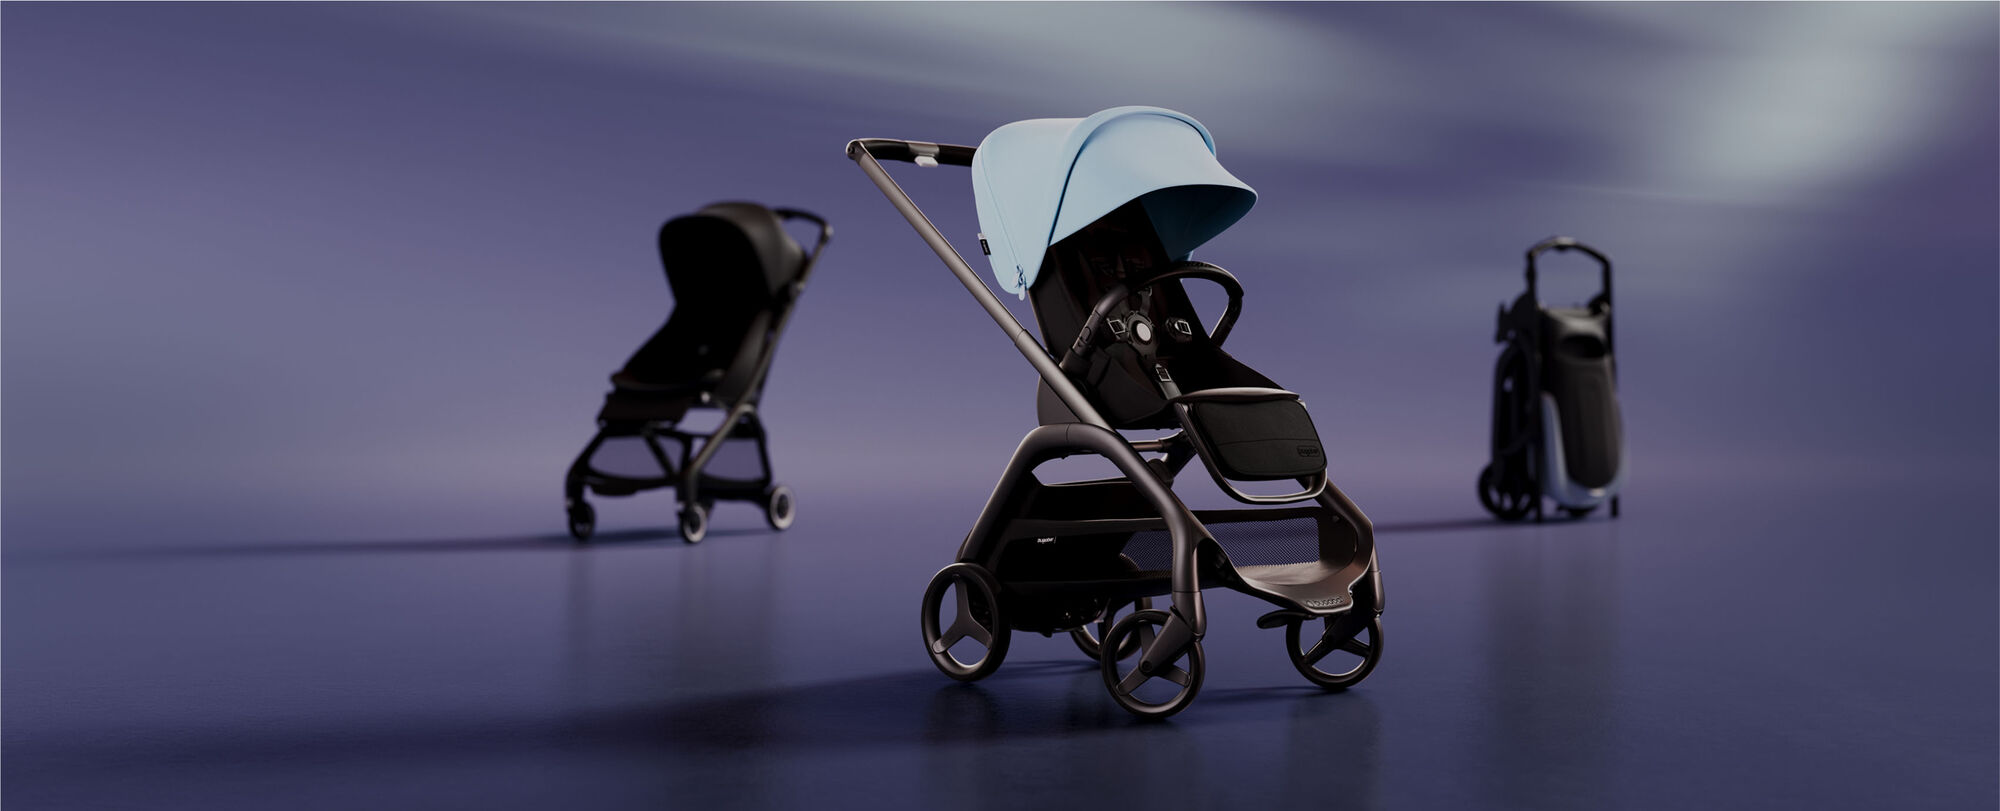 A lineup of 3 pushchairs. At the front is a Bugaboo Dragonfly with Skyline Blue sun canopy. On the left is a Bugaboo Butterfly with Midnight Black fabrics. On the right is a self-standing folded Bugaboo Dragonfly.